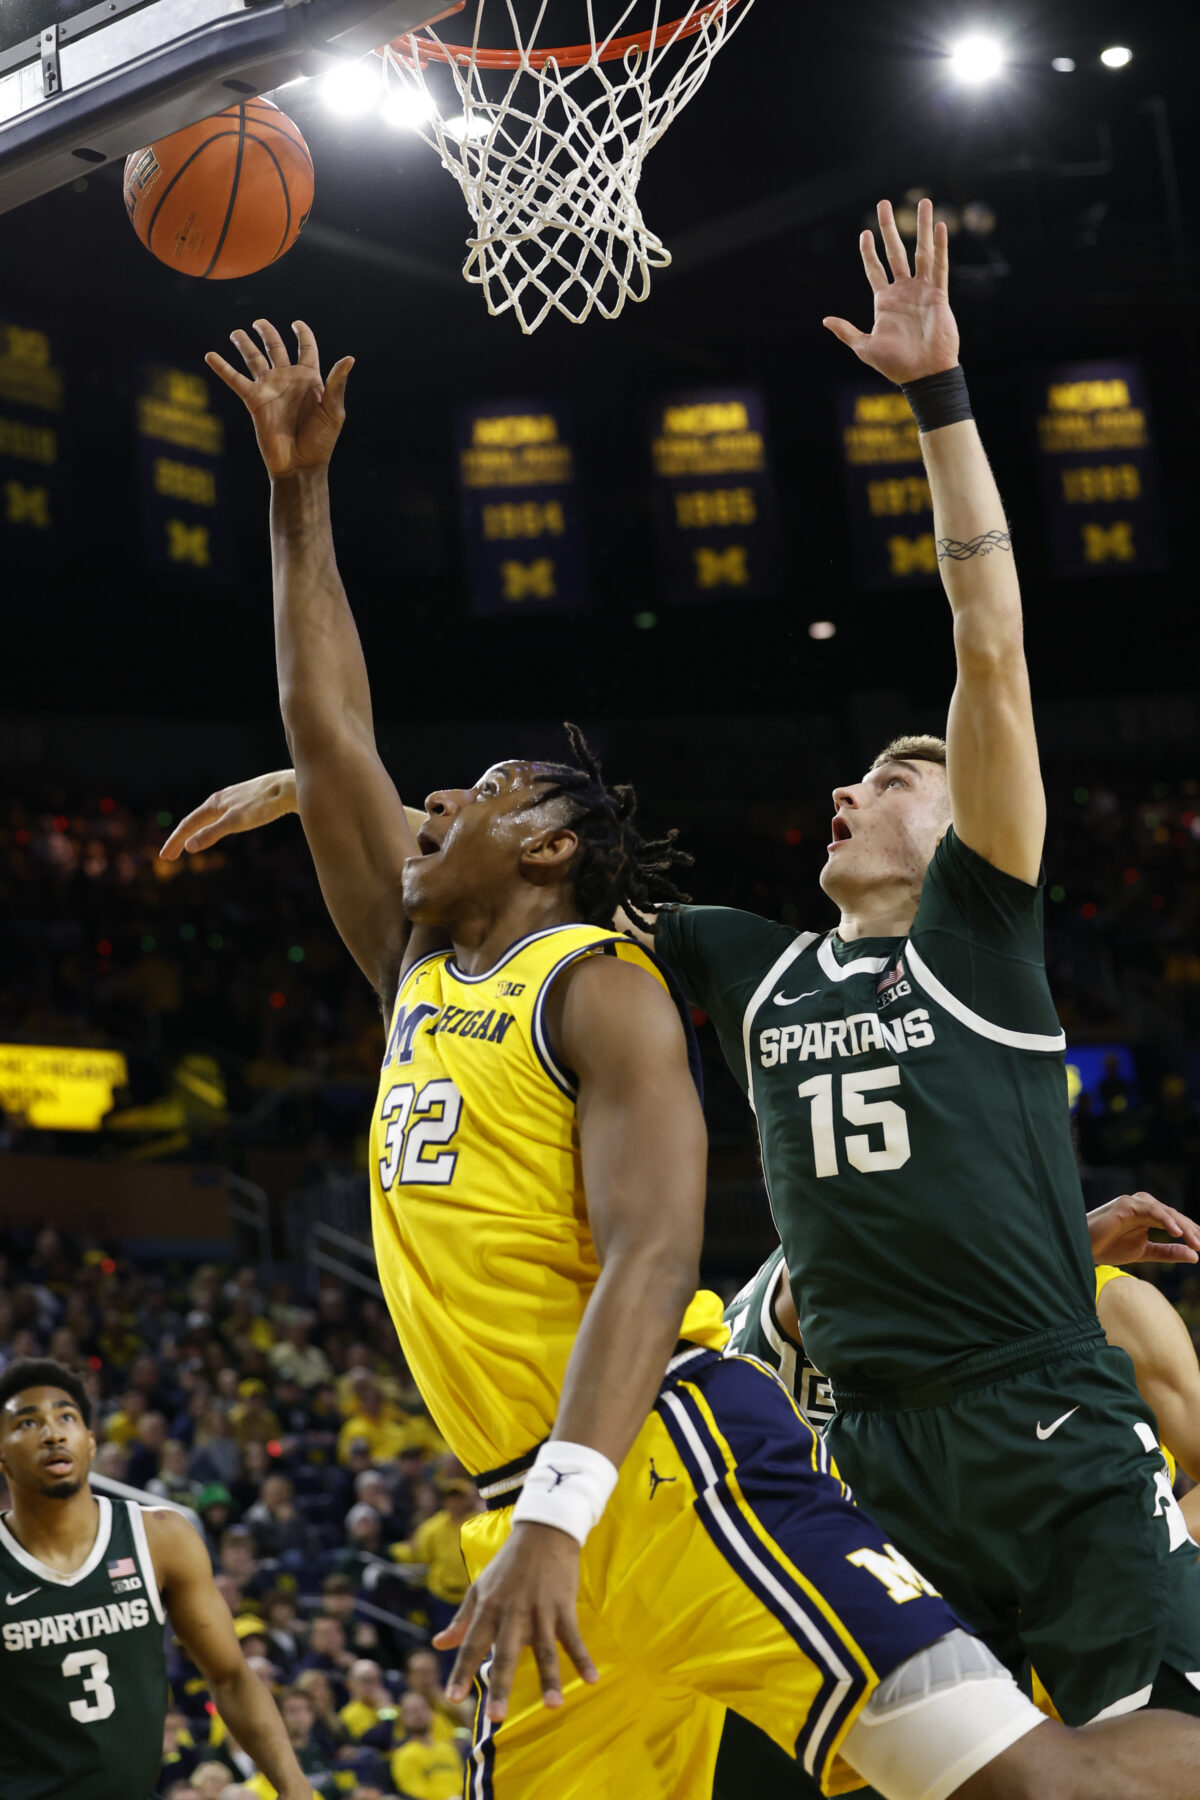 Gallery: Best photos from MSU basketball’s win at Michigan on Saturday